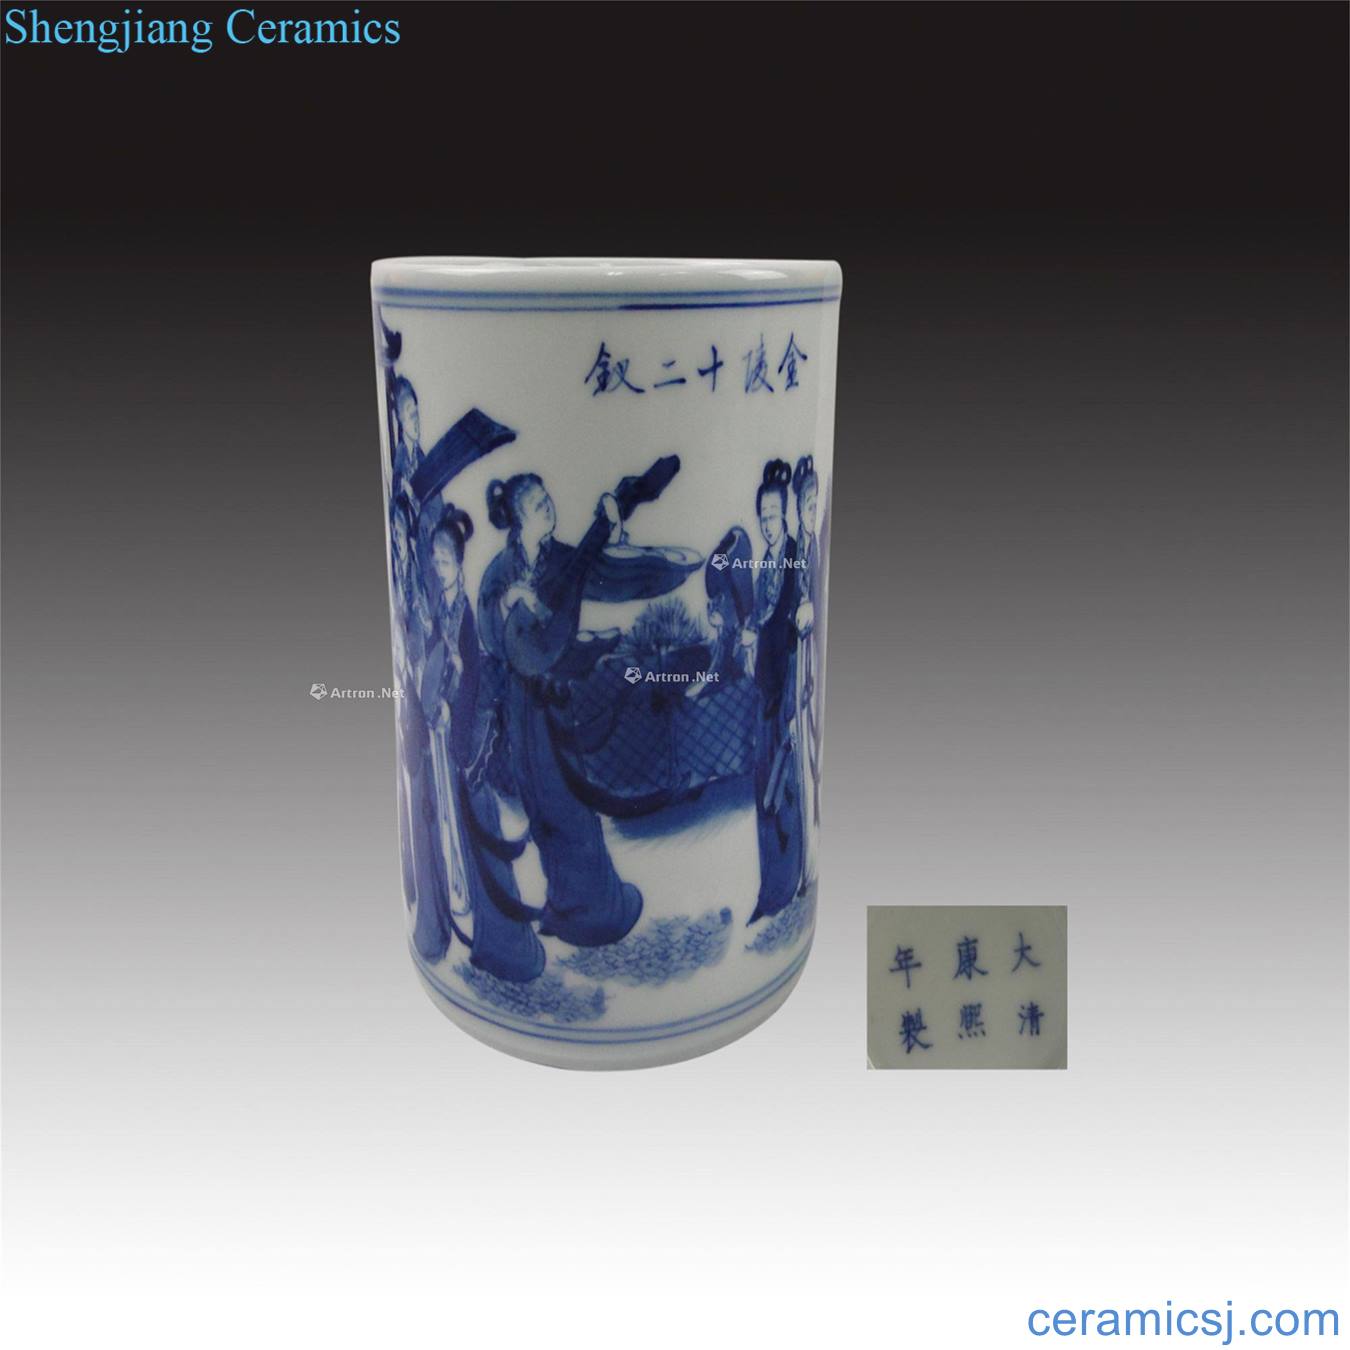 In the qing dynasty Blue and white characters pen container